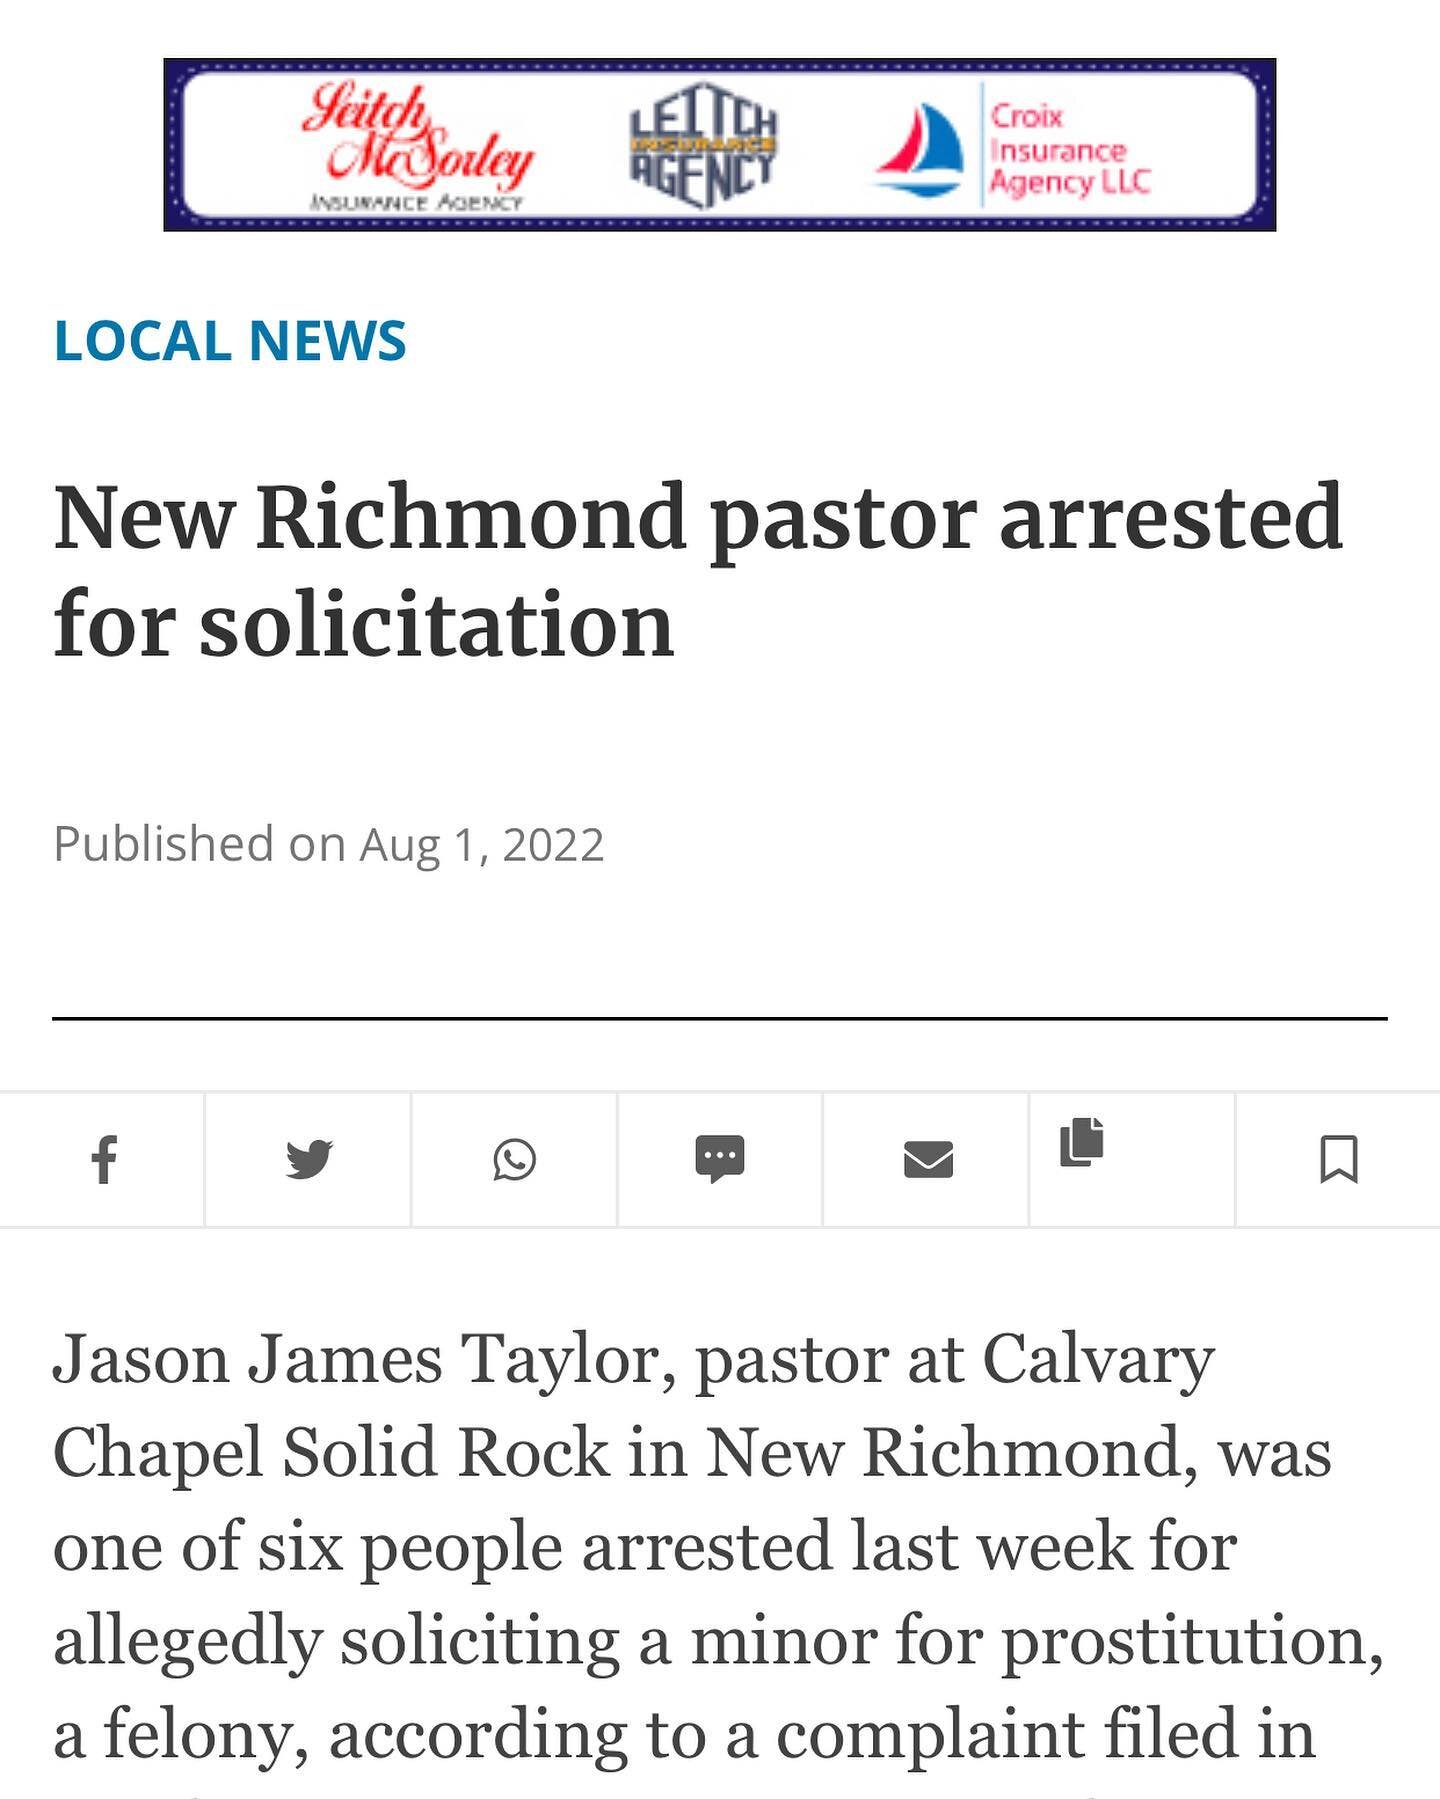 This is why I say this evil is in our communities, it&rsquo;s in our midst. It&rsquo;s each individual man who embraces sexual immorality that could fall into the trap of abusing children. This is why it&rsquo;s so hard to get pastors to tackle this 